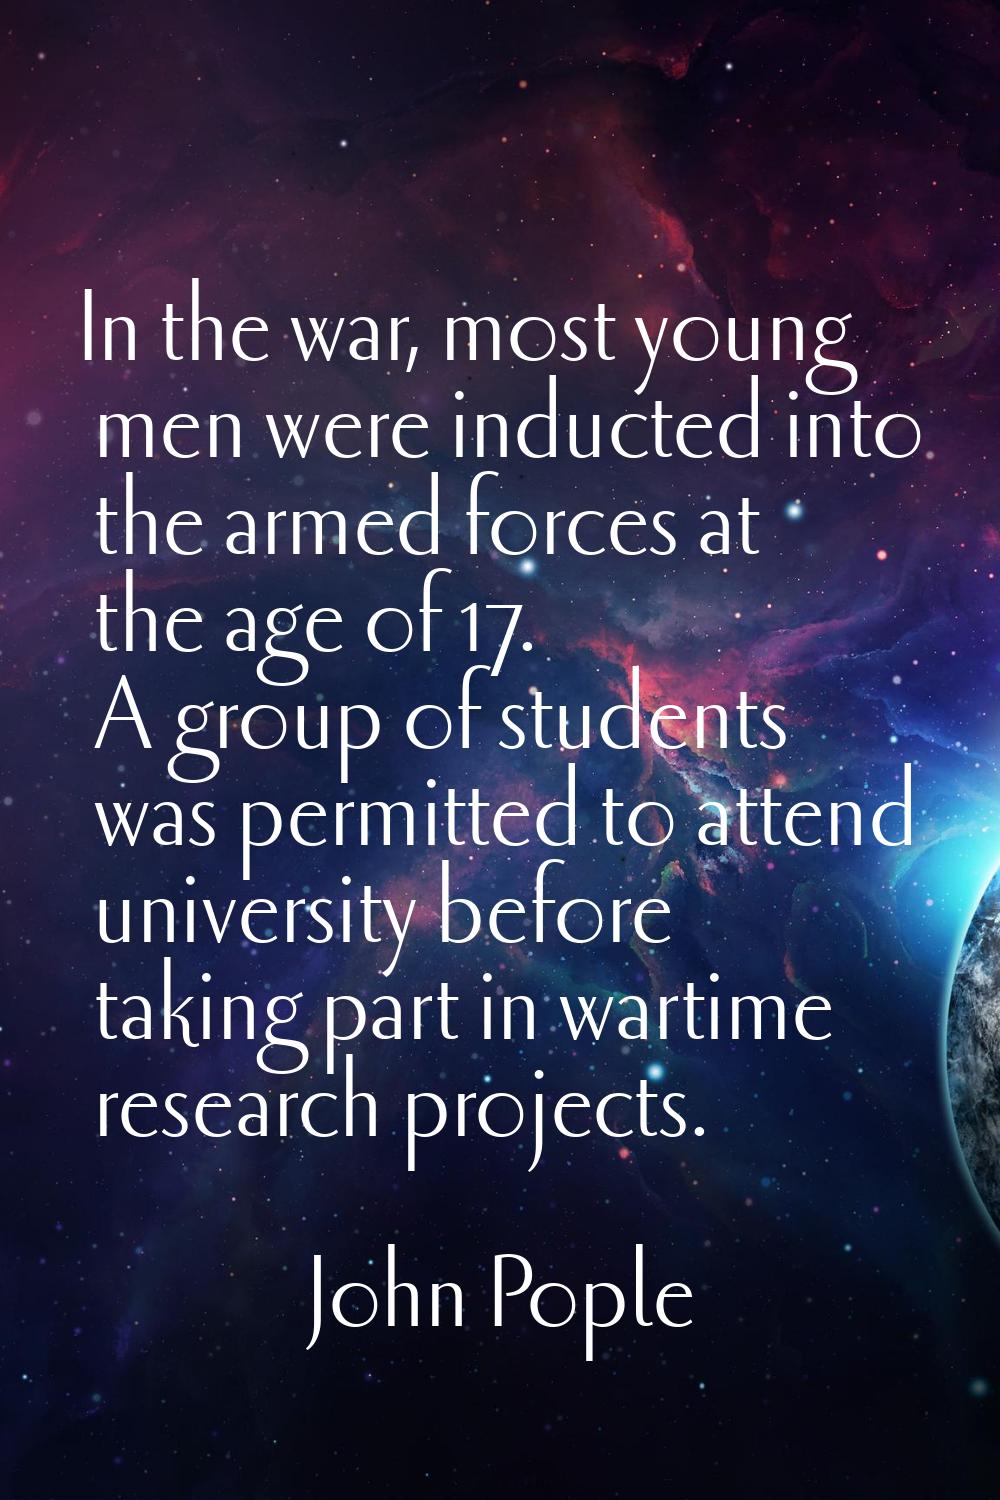 In the war, most young men were inducted into the armed forces at the age of 17. A group of student